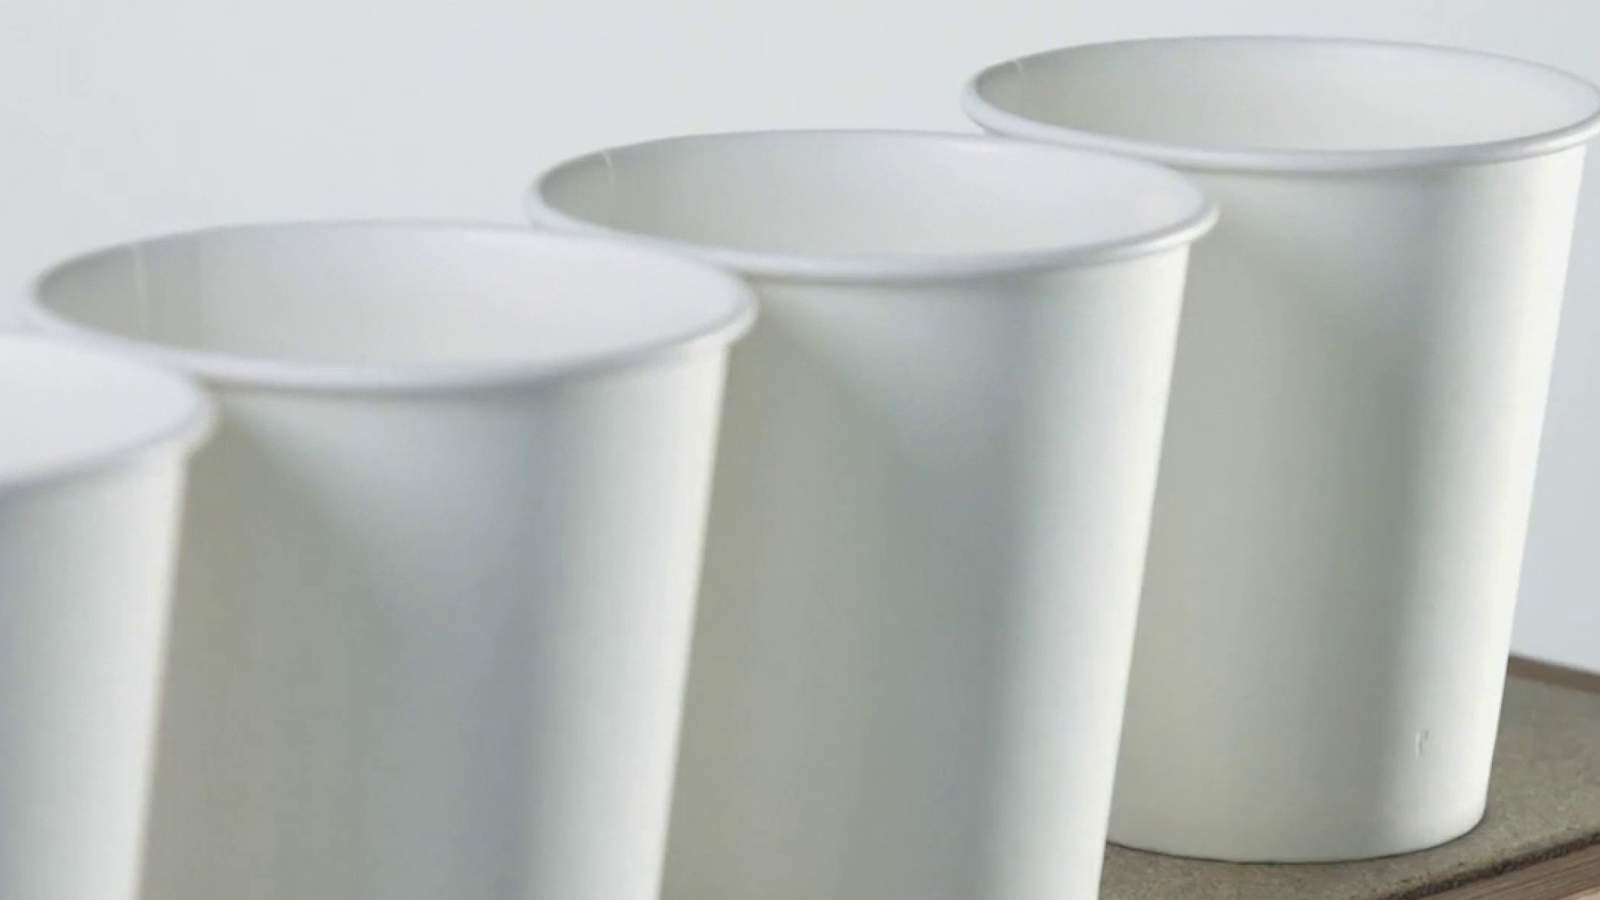 Why experts say drinking coffee from paper cups can lead to serious health conditions